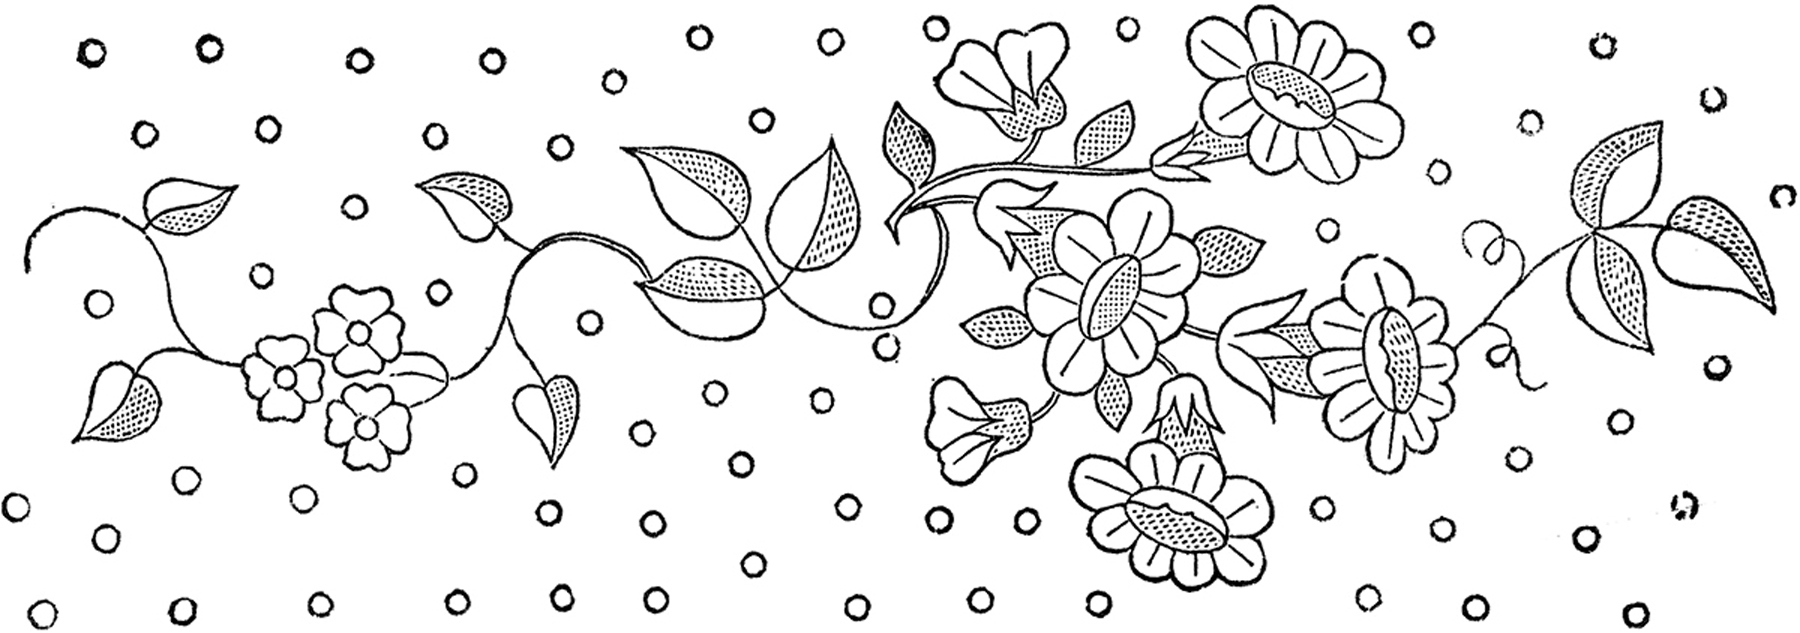 Printable Embroidery Patterns Floral Embroidery Patterns Pretty The Graphics Fairy